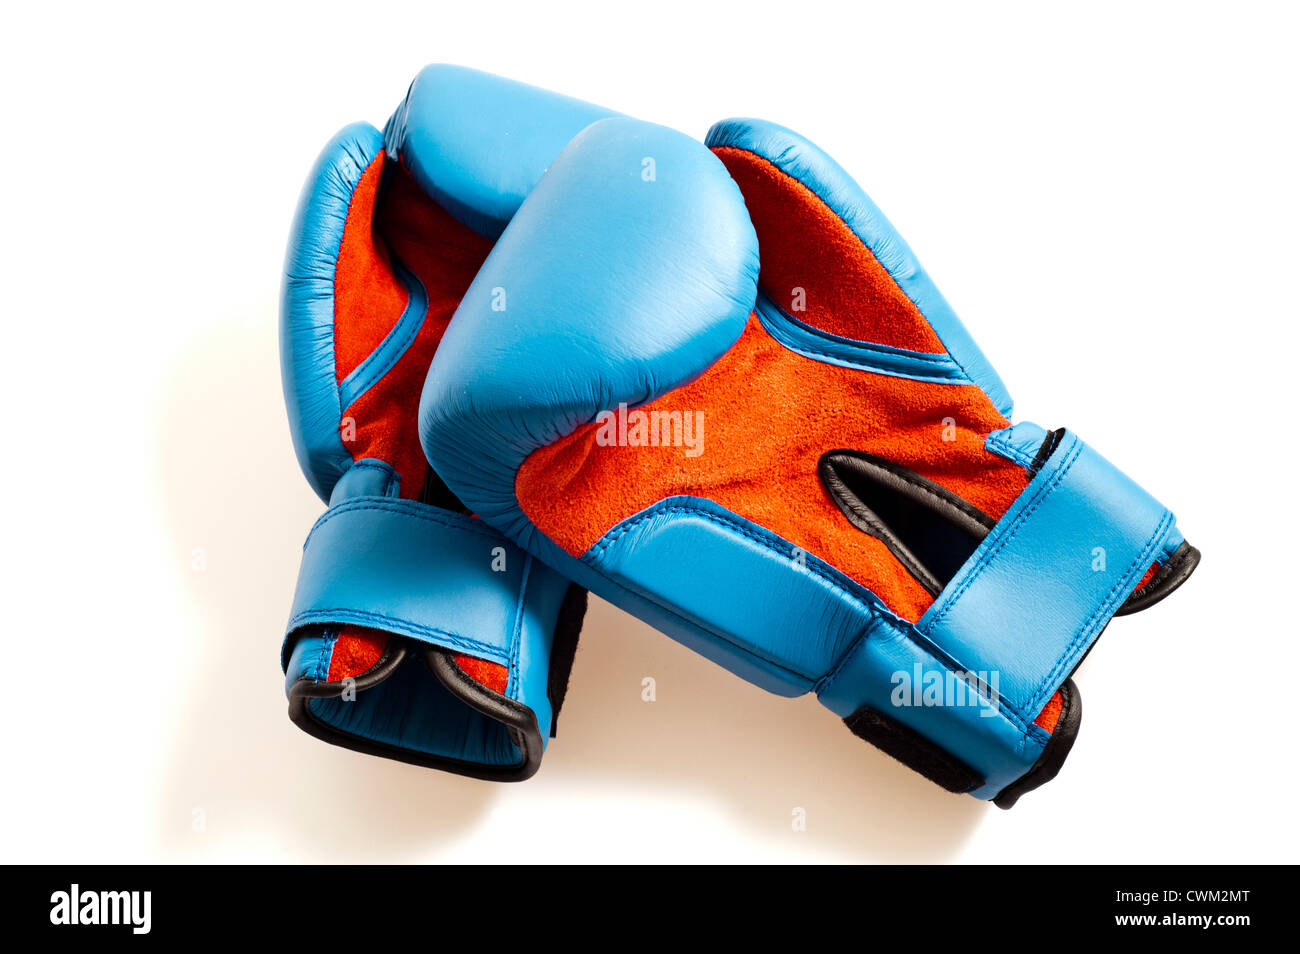 pair of boxing gloves isolated Stock Photo